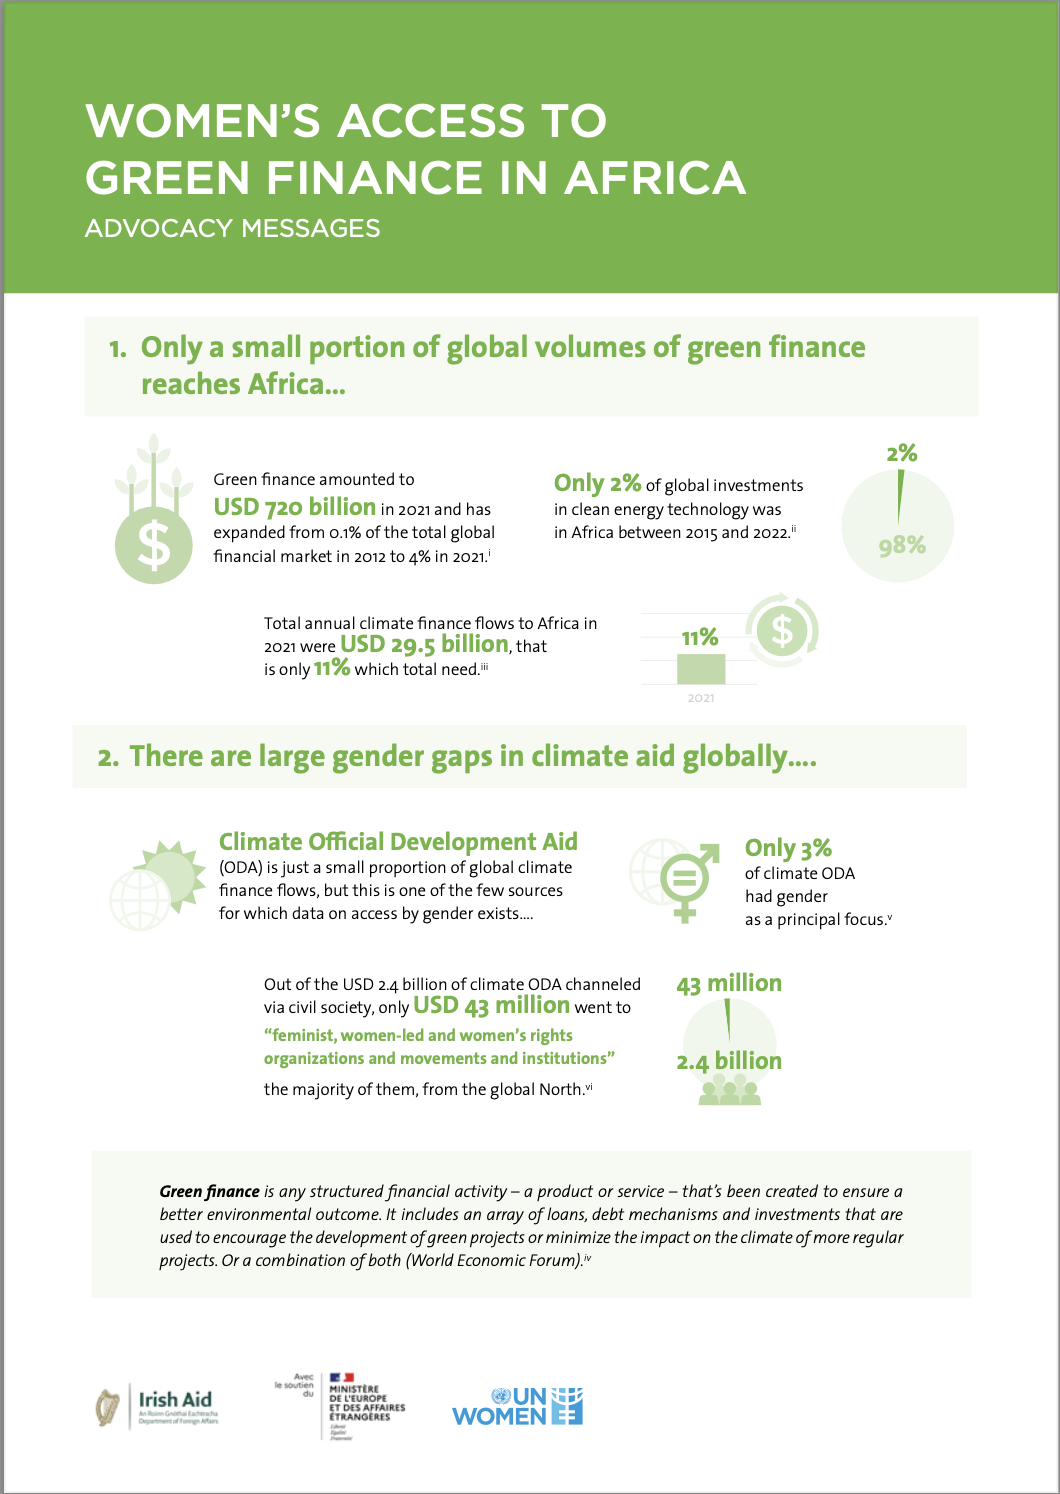 ACCESS TO GREEN FINANCE FOR WOMEN IN AFRICA: ADVOCACY MESSAGES 